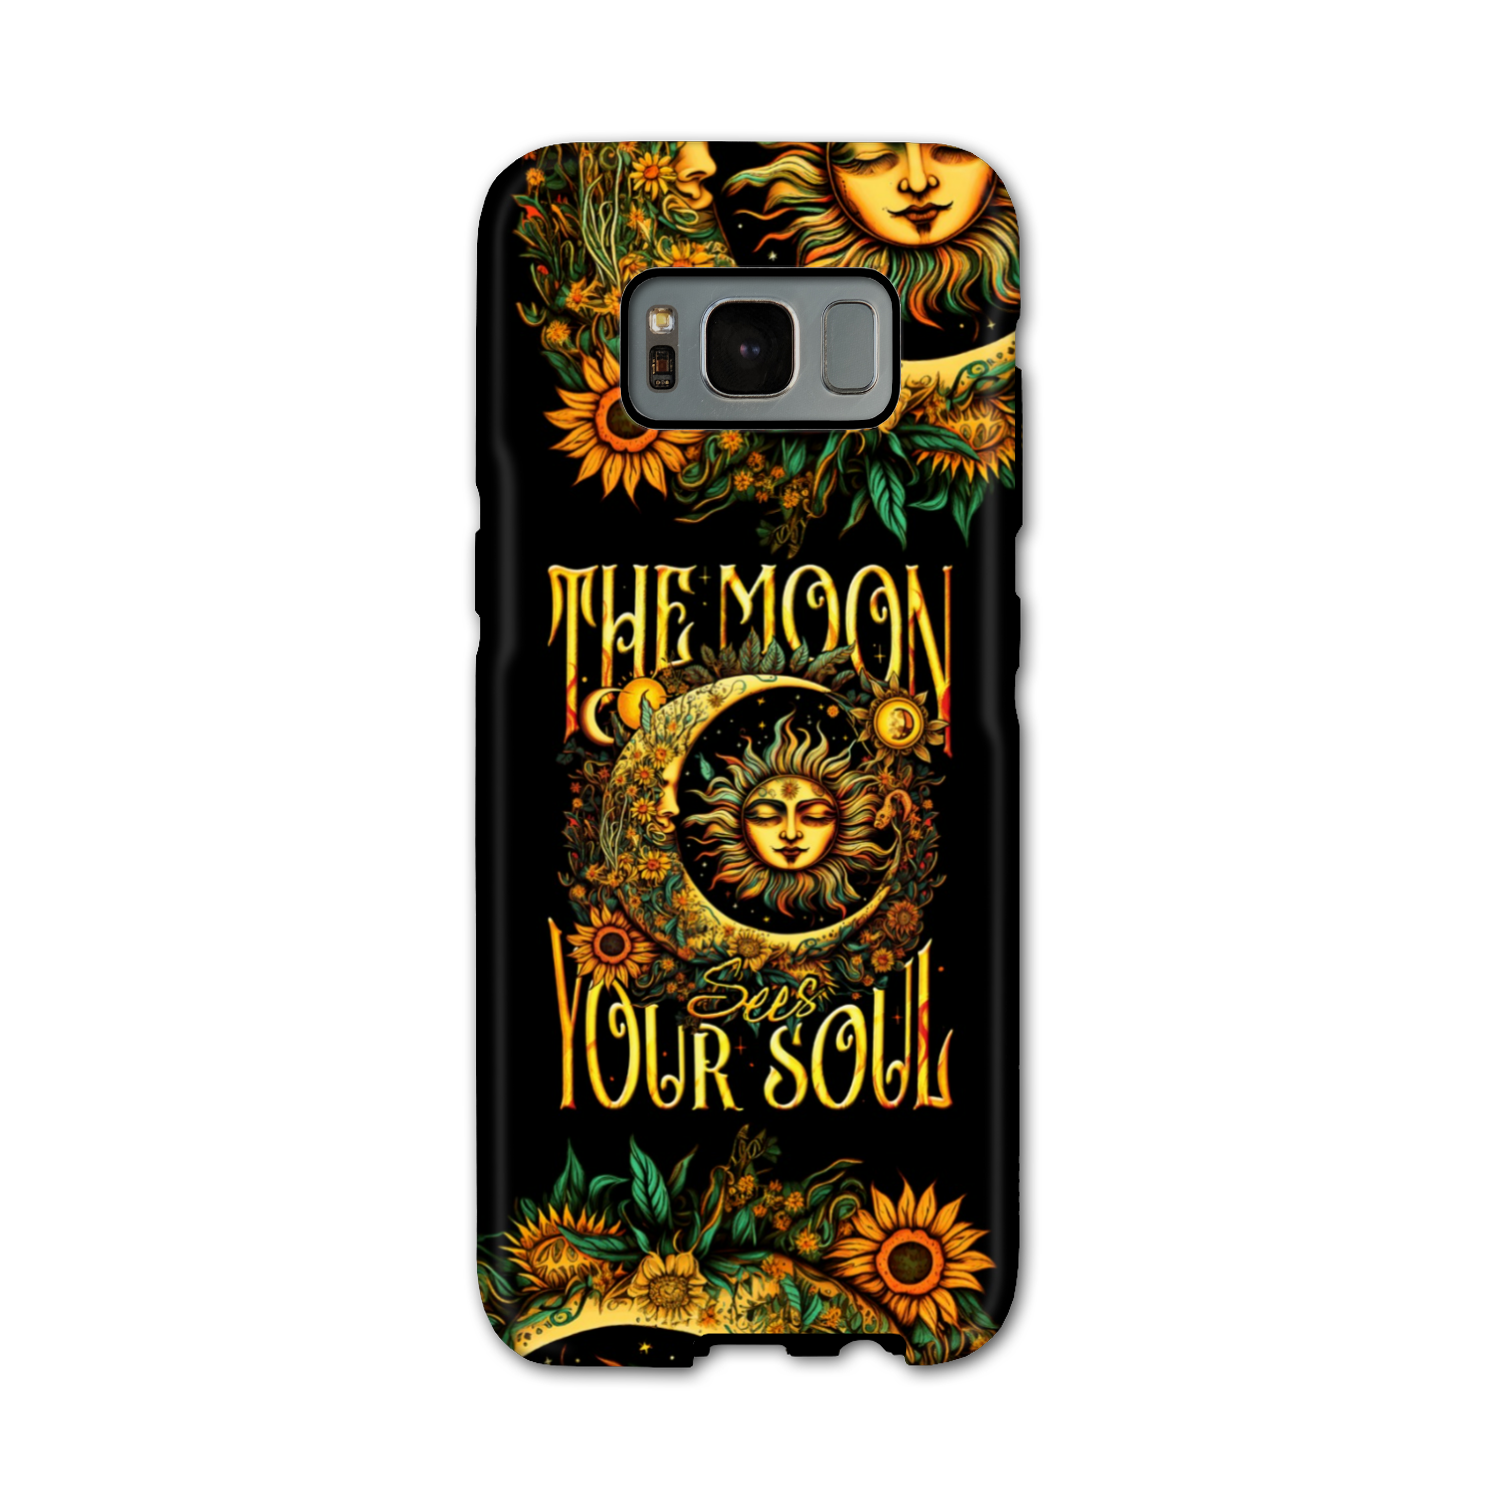 THE MOON SEES YOUR SOUL PHONE CASE - TY1104232